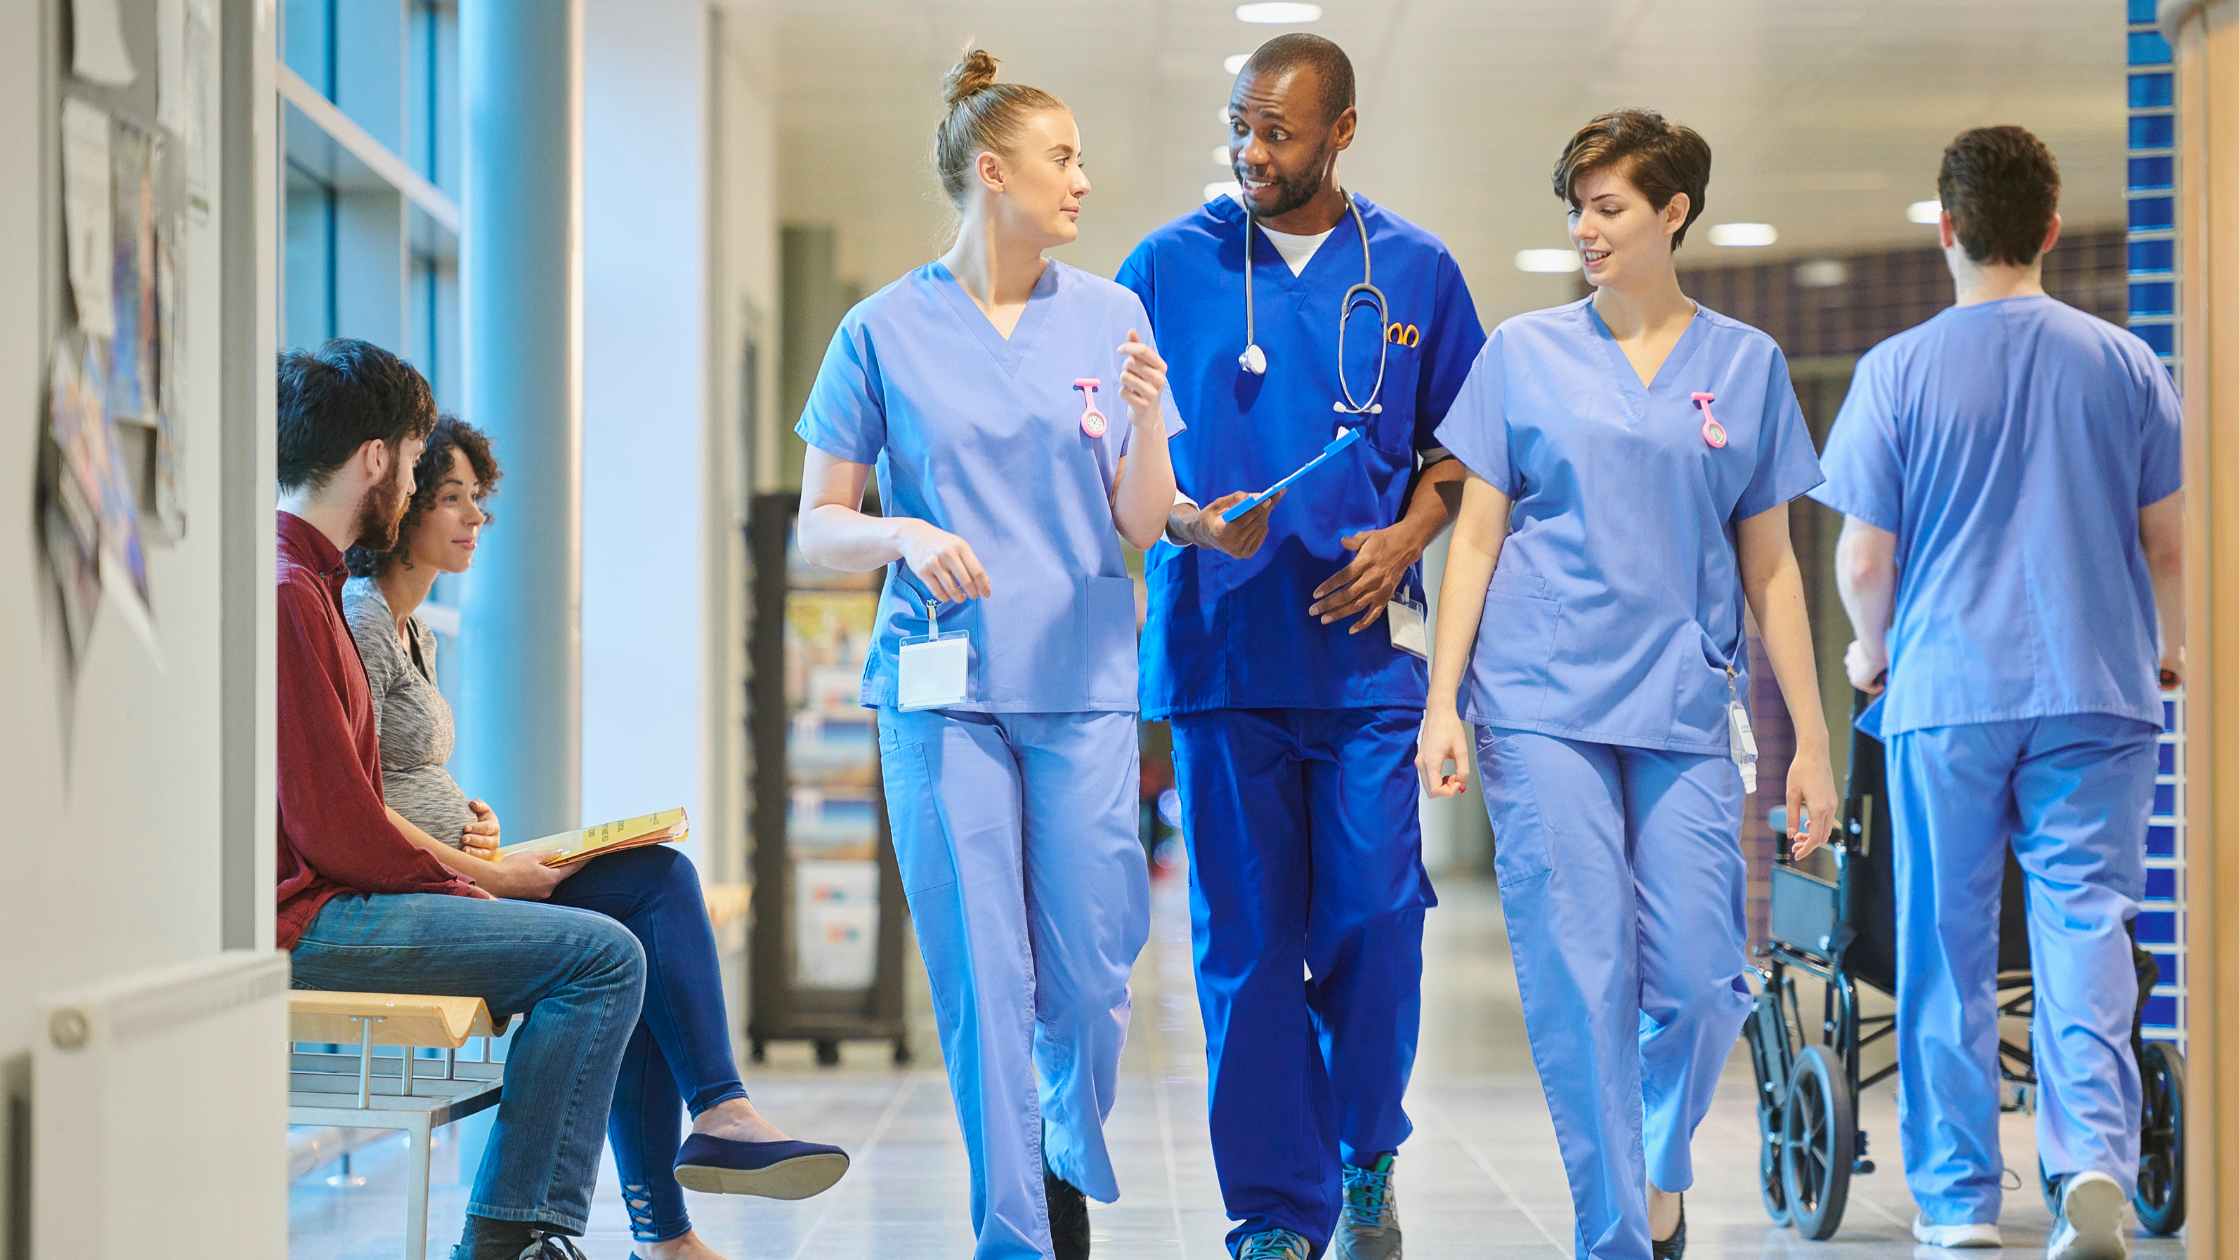 NHS workers walking through a hospital